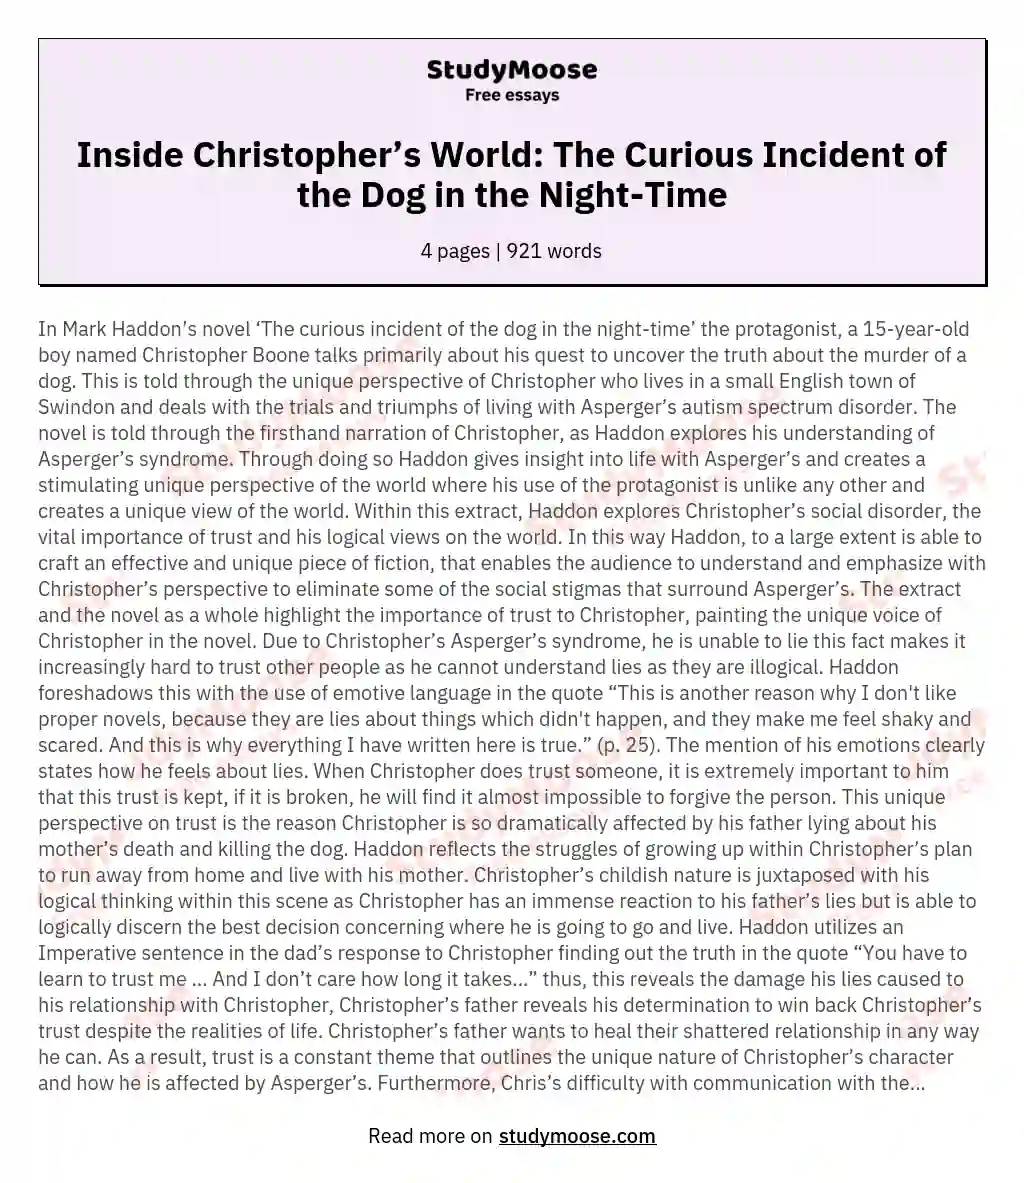 Inside Christopher’s World: The Curious Incident of the Dog in the Night-Time